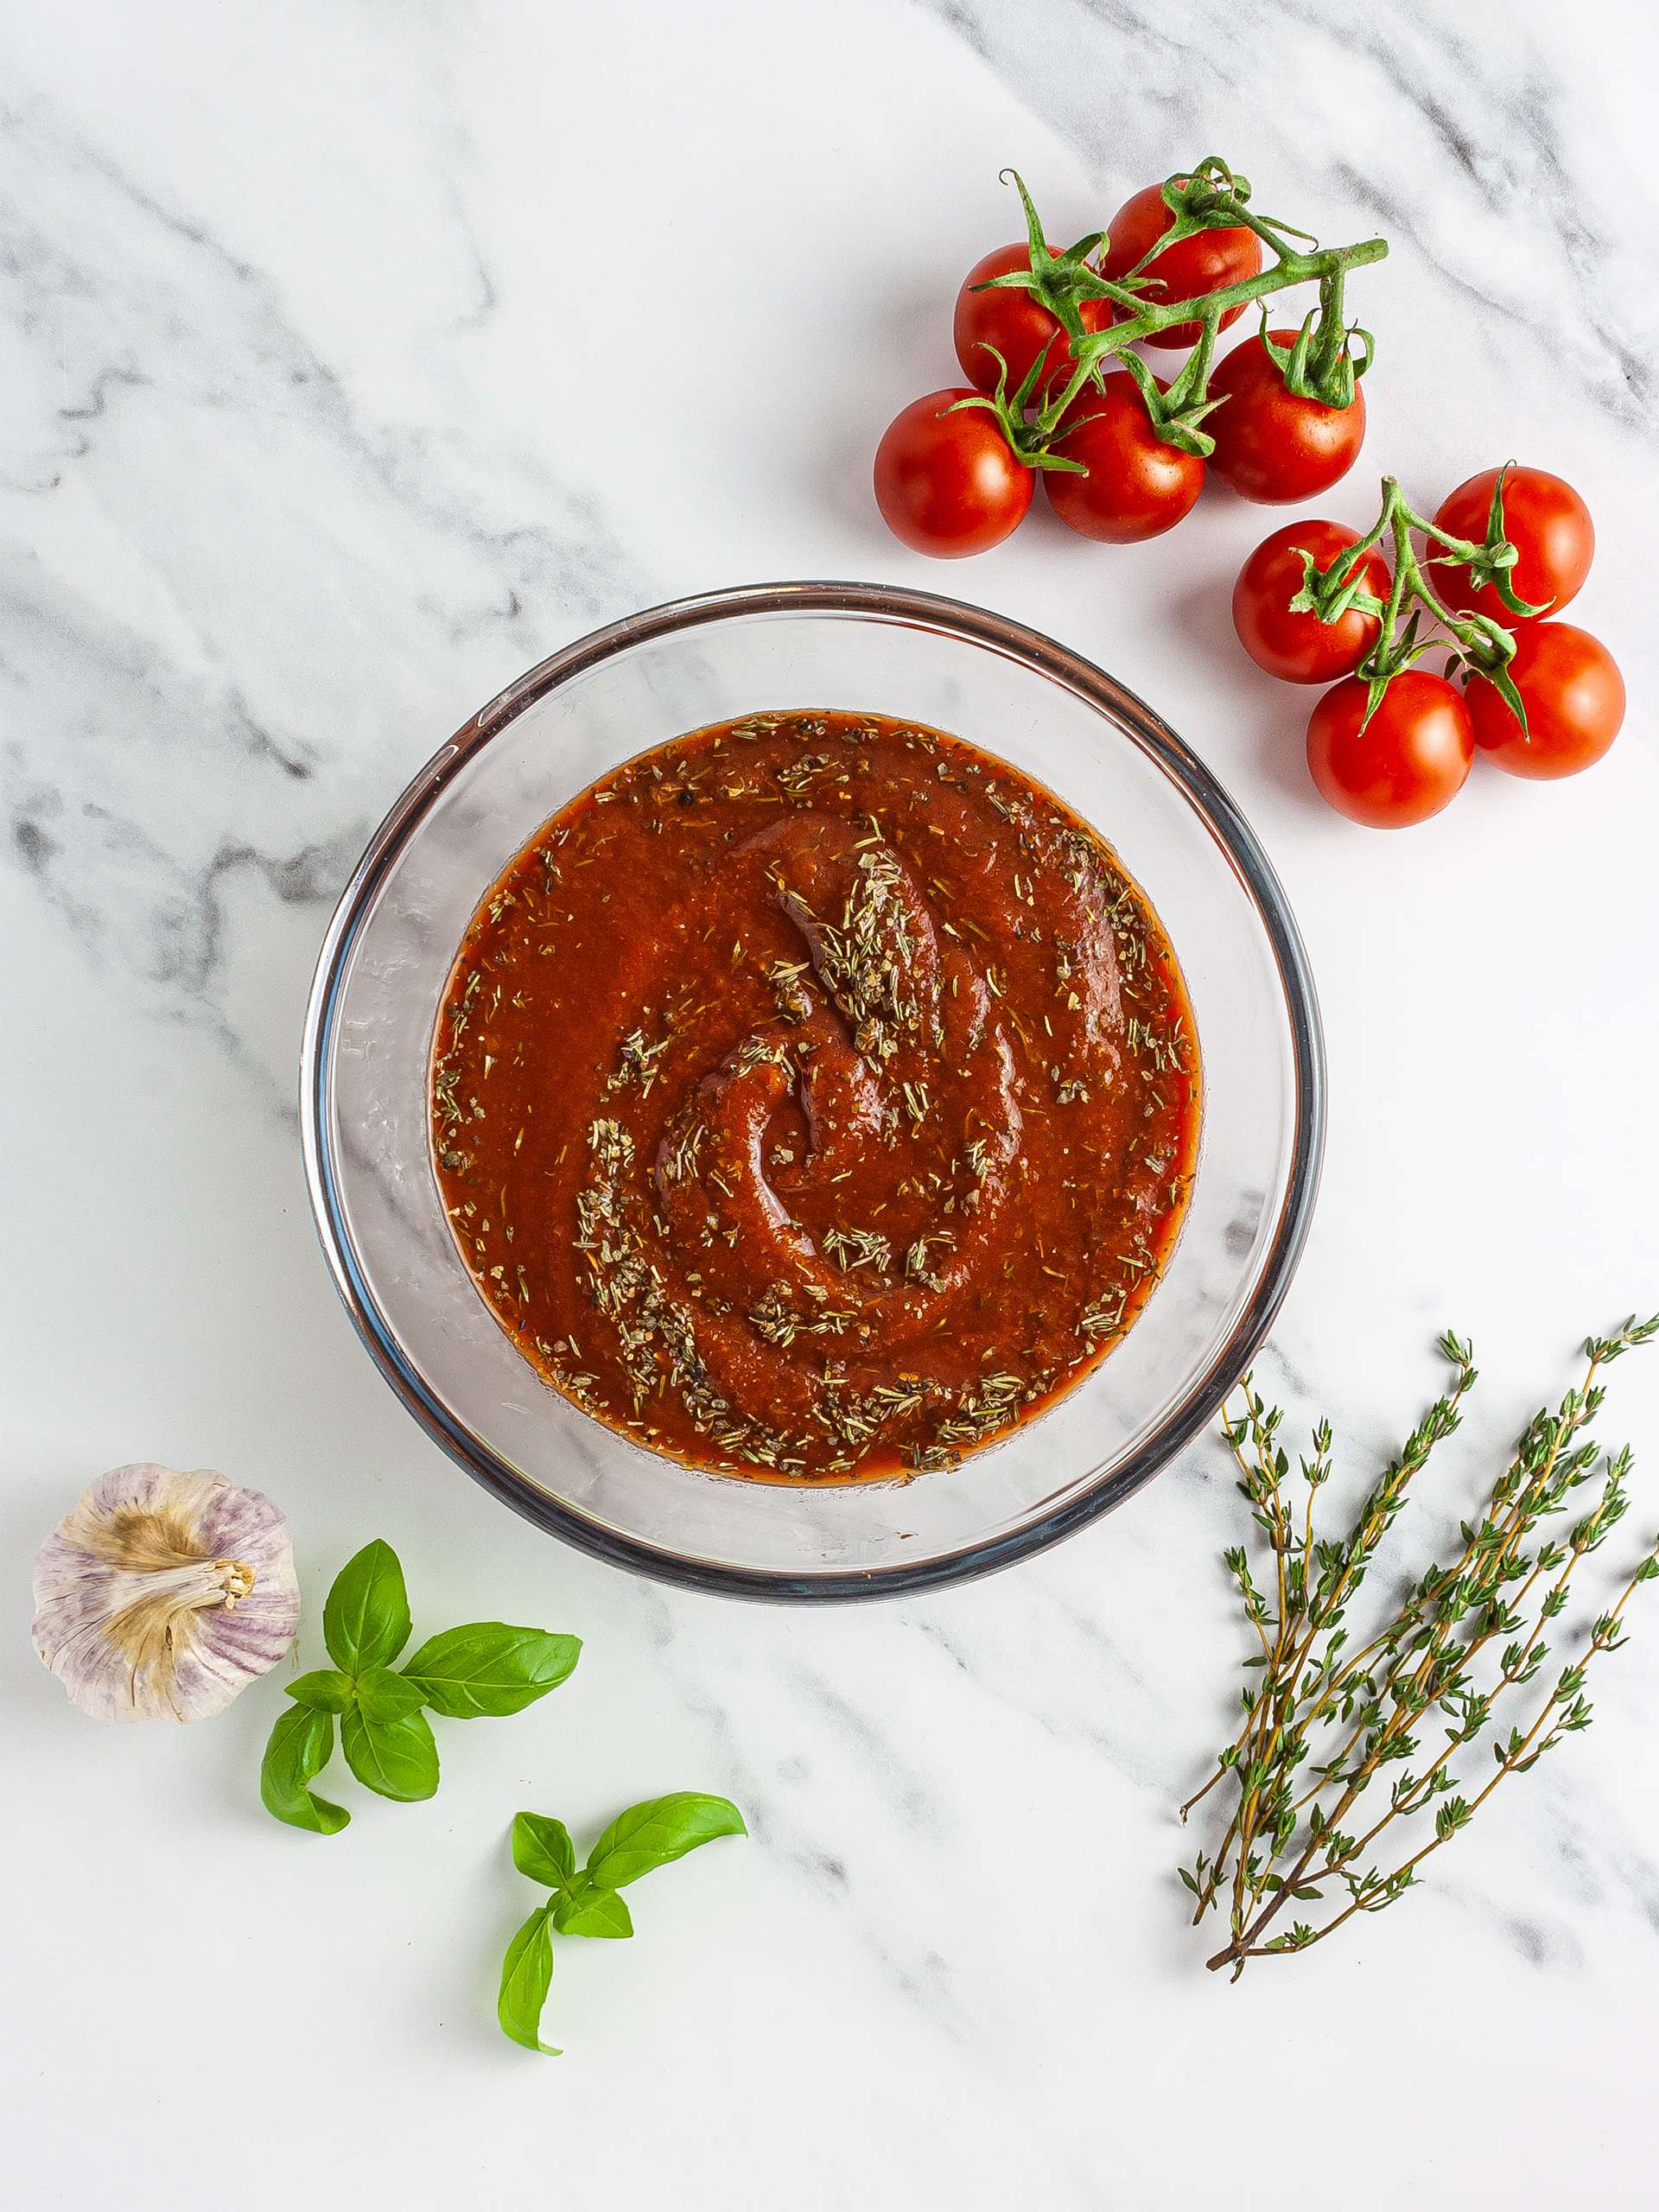 Tomato sauce with basil and thyme